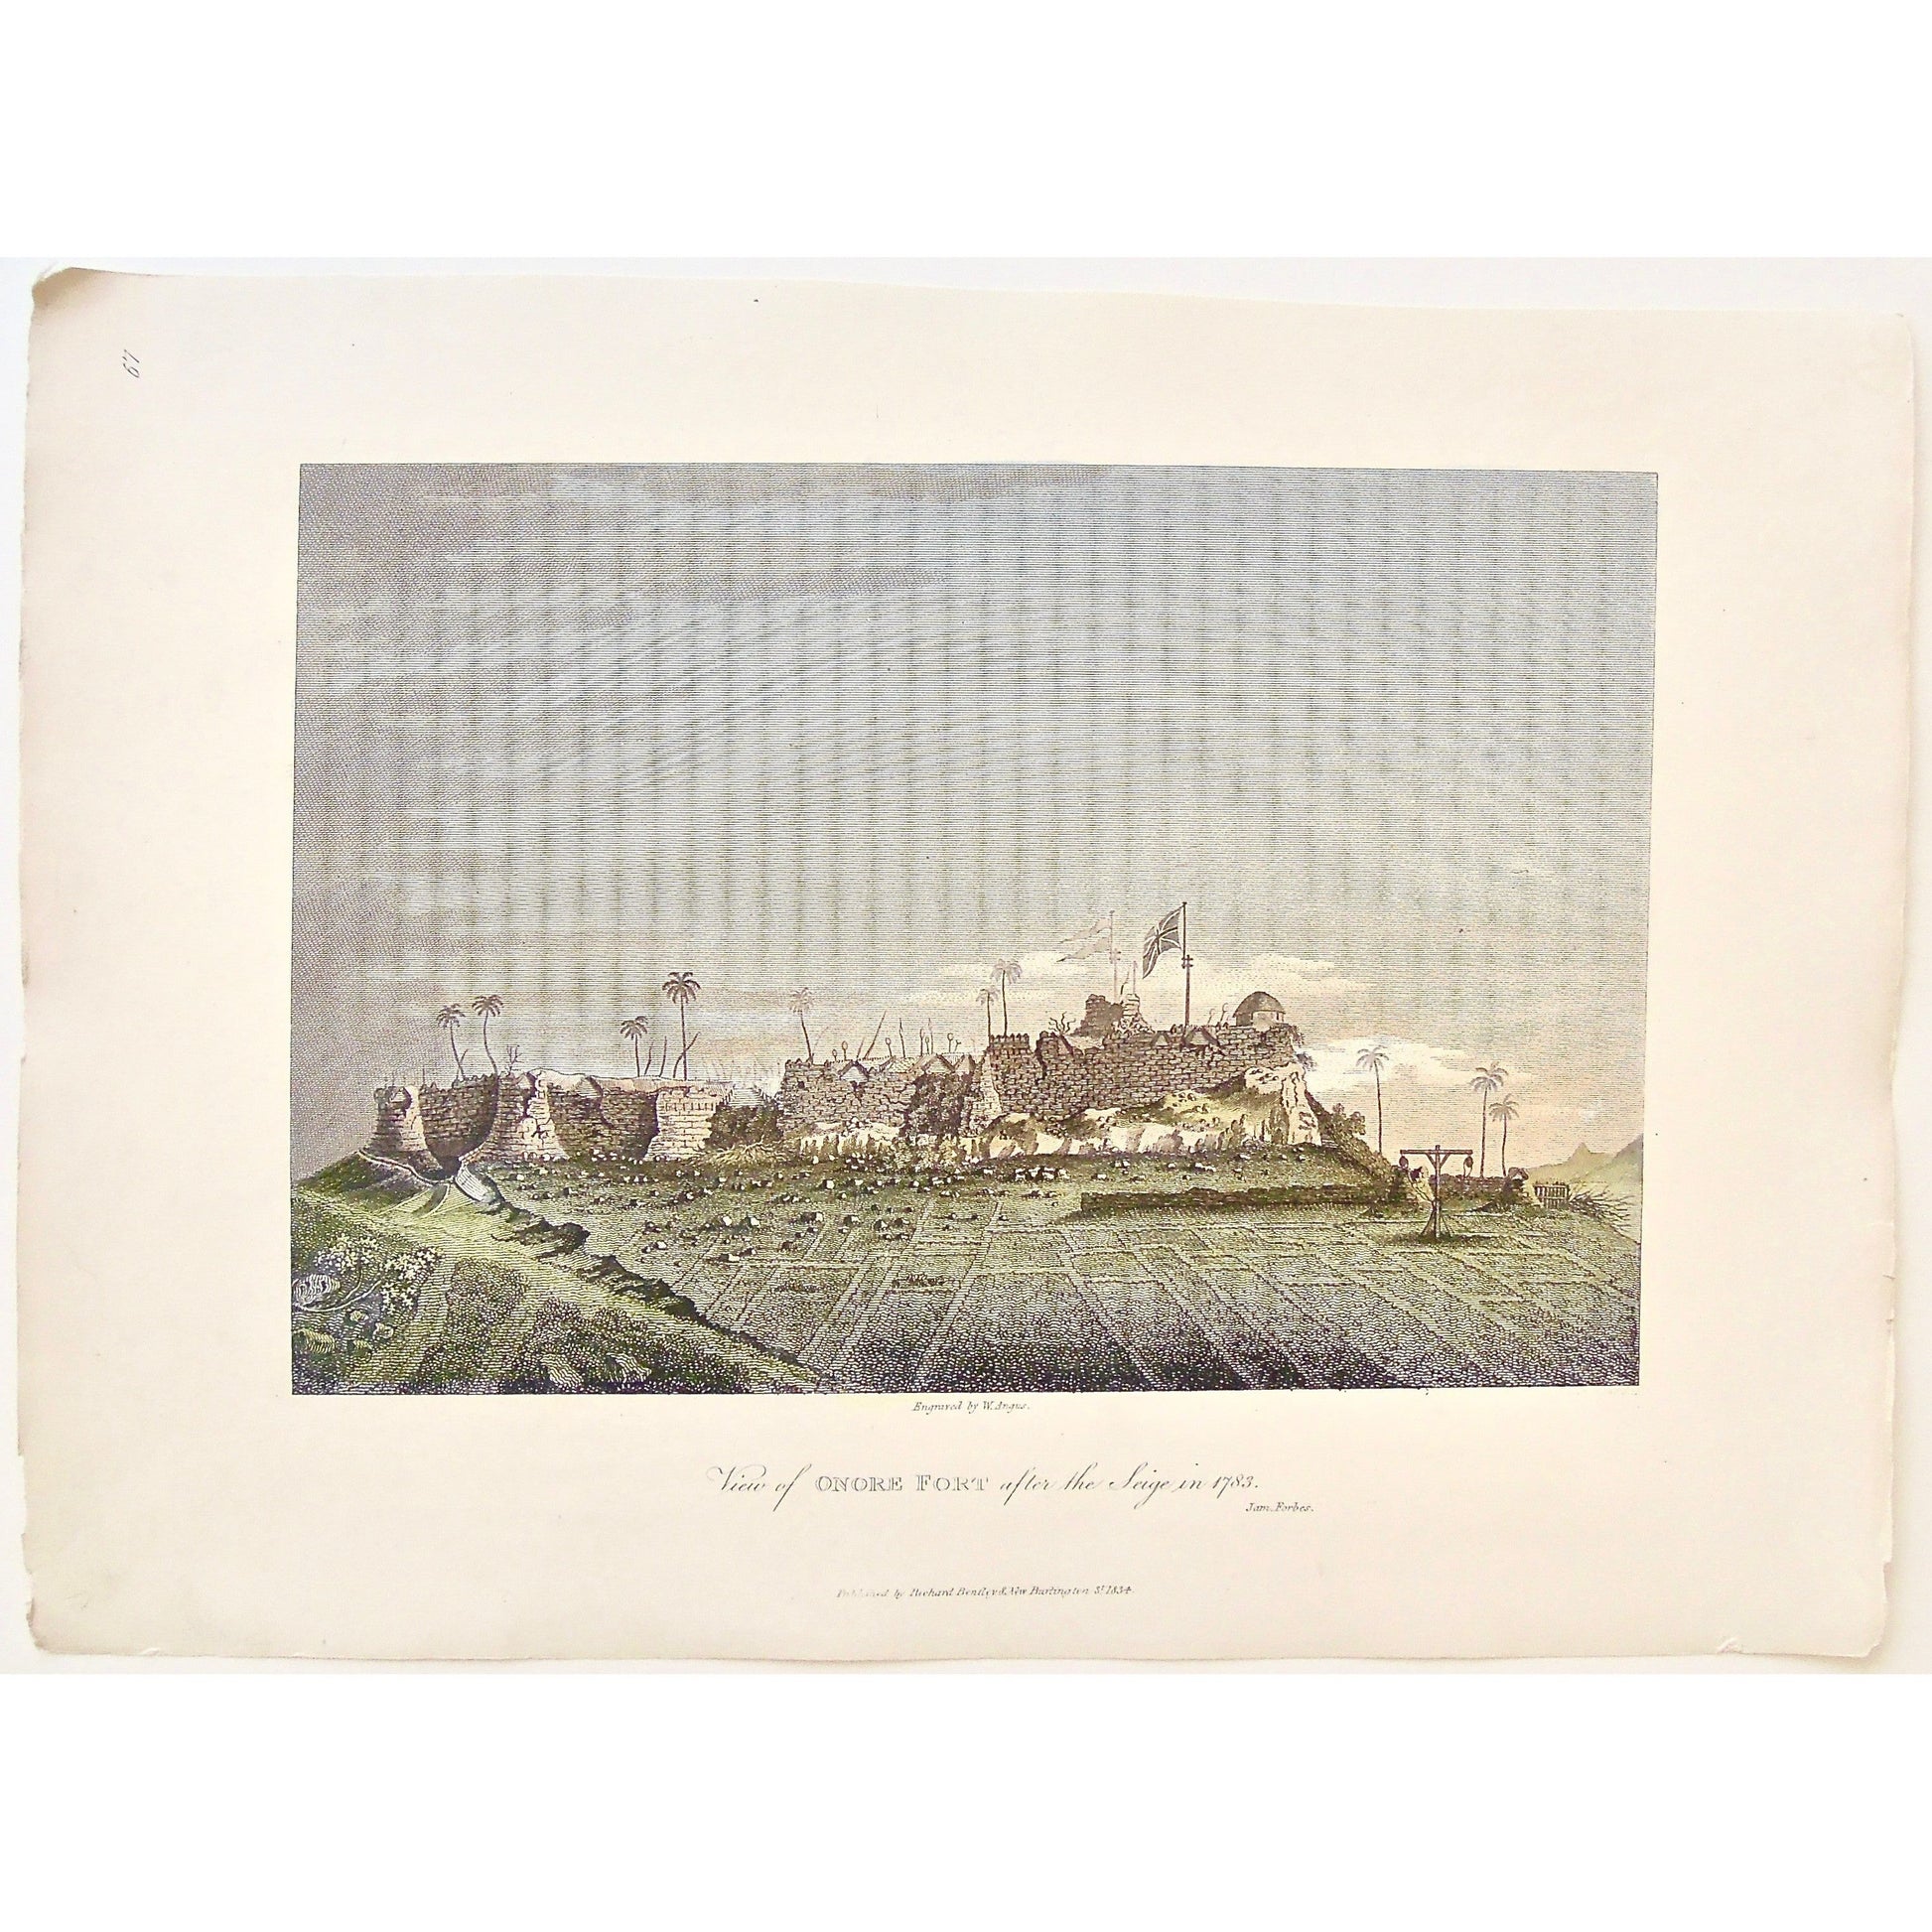 View of the Onore Fort, Onore Fort, View, Onore Fort after the siege of 1783, Siege of 1783, Fort, Fortress, India, Indian, Indian Flag, Indian Fort, Structure, Indian Architecture, Architecture, Manicured landscape, stone fort, James Forbes, Forbes, Eliza Rosée, Countess De Montalembert, Oriental Memoirs, Narrative of Seventeen Years Residence in India, Bentley, 8 New Burlington Street, London, Angus, Nichols & Son, 25 Parliament Street, 1783, 1834, Antique Print, Antique, Prints, Vintage Prints, Vintage,